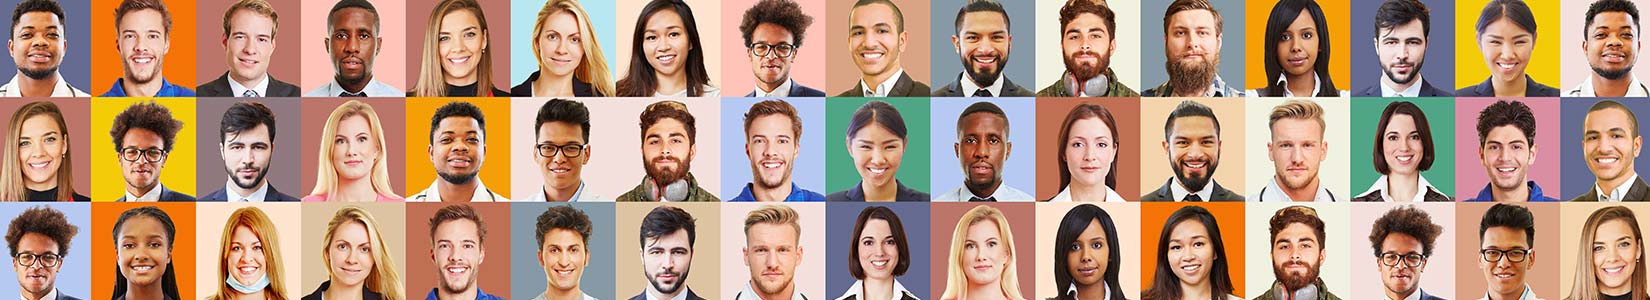 Diverse Workplace Employees